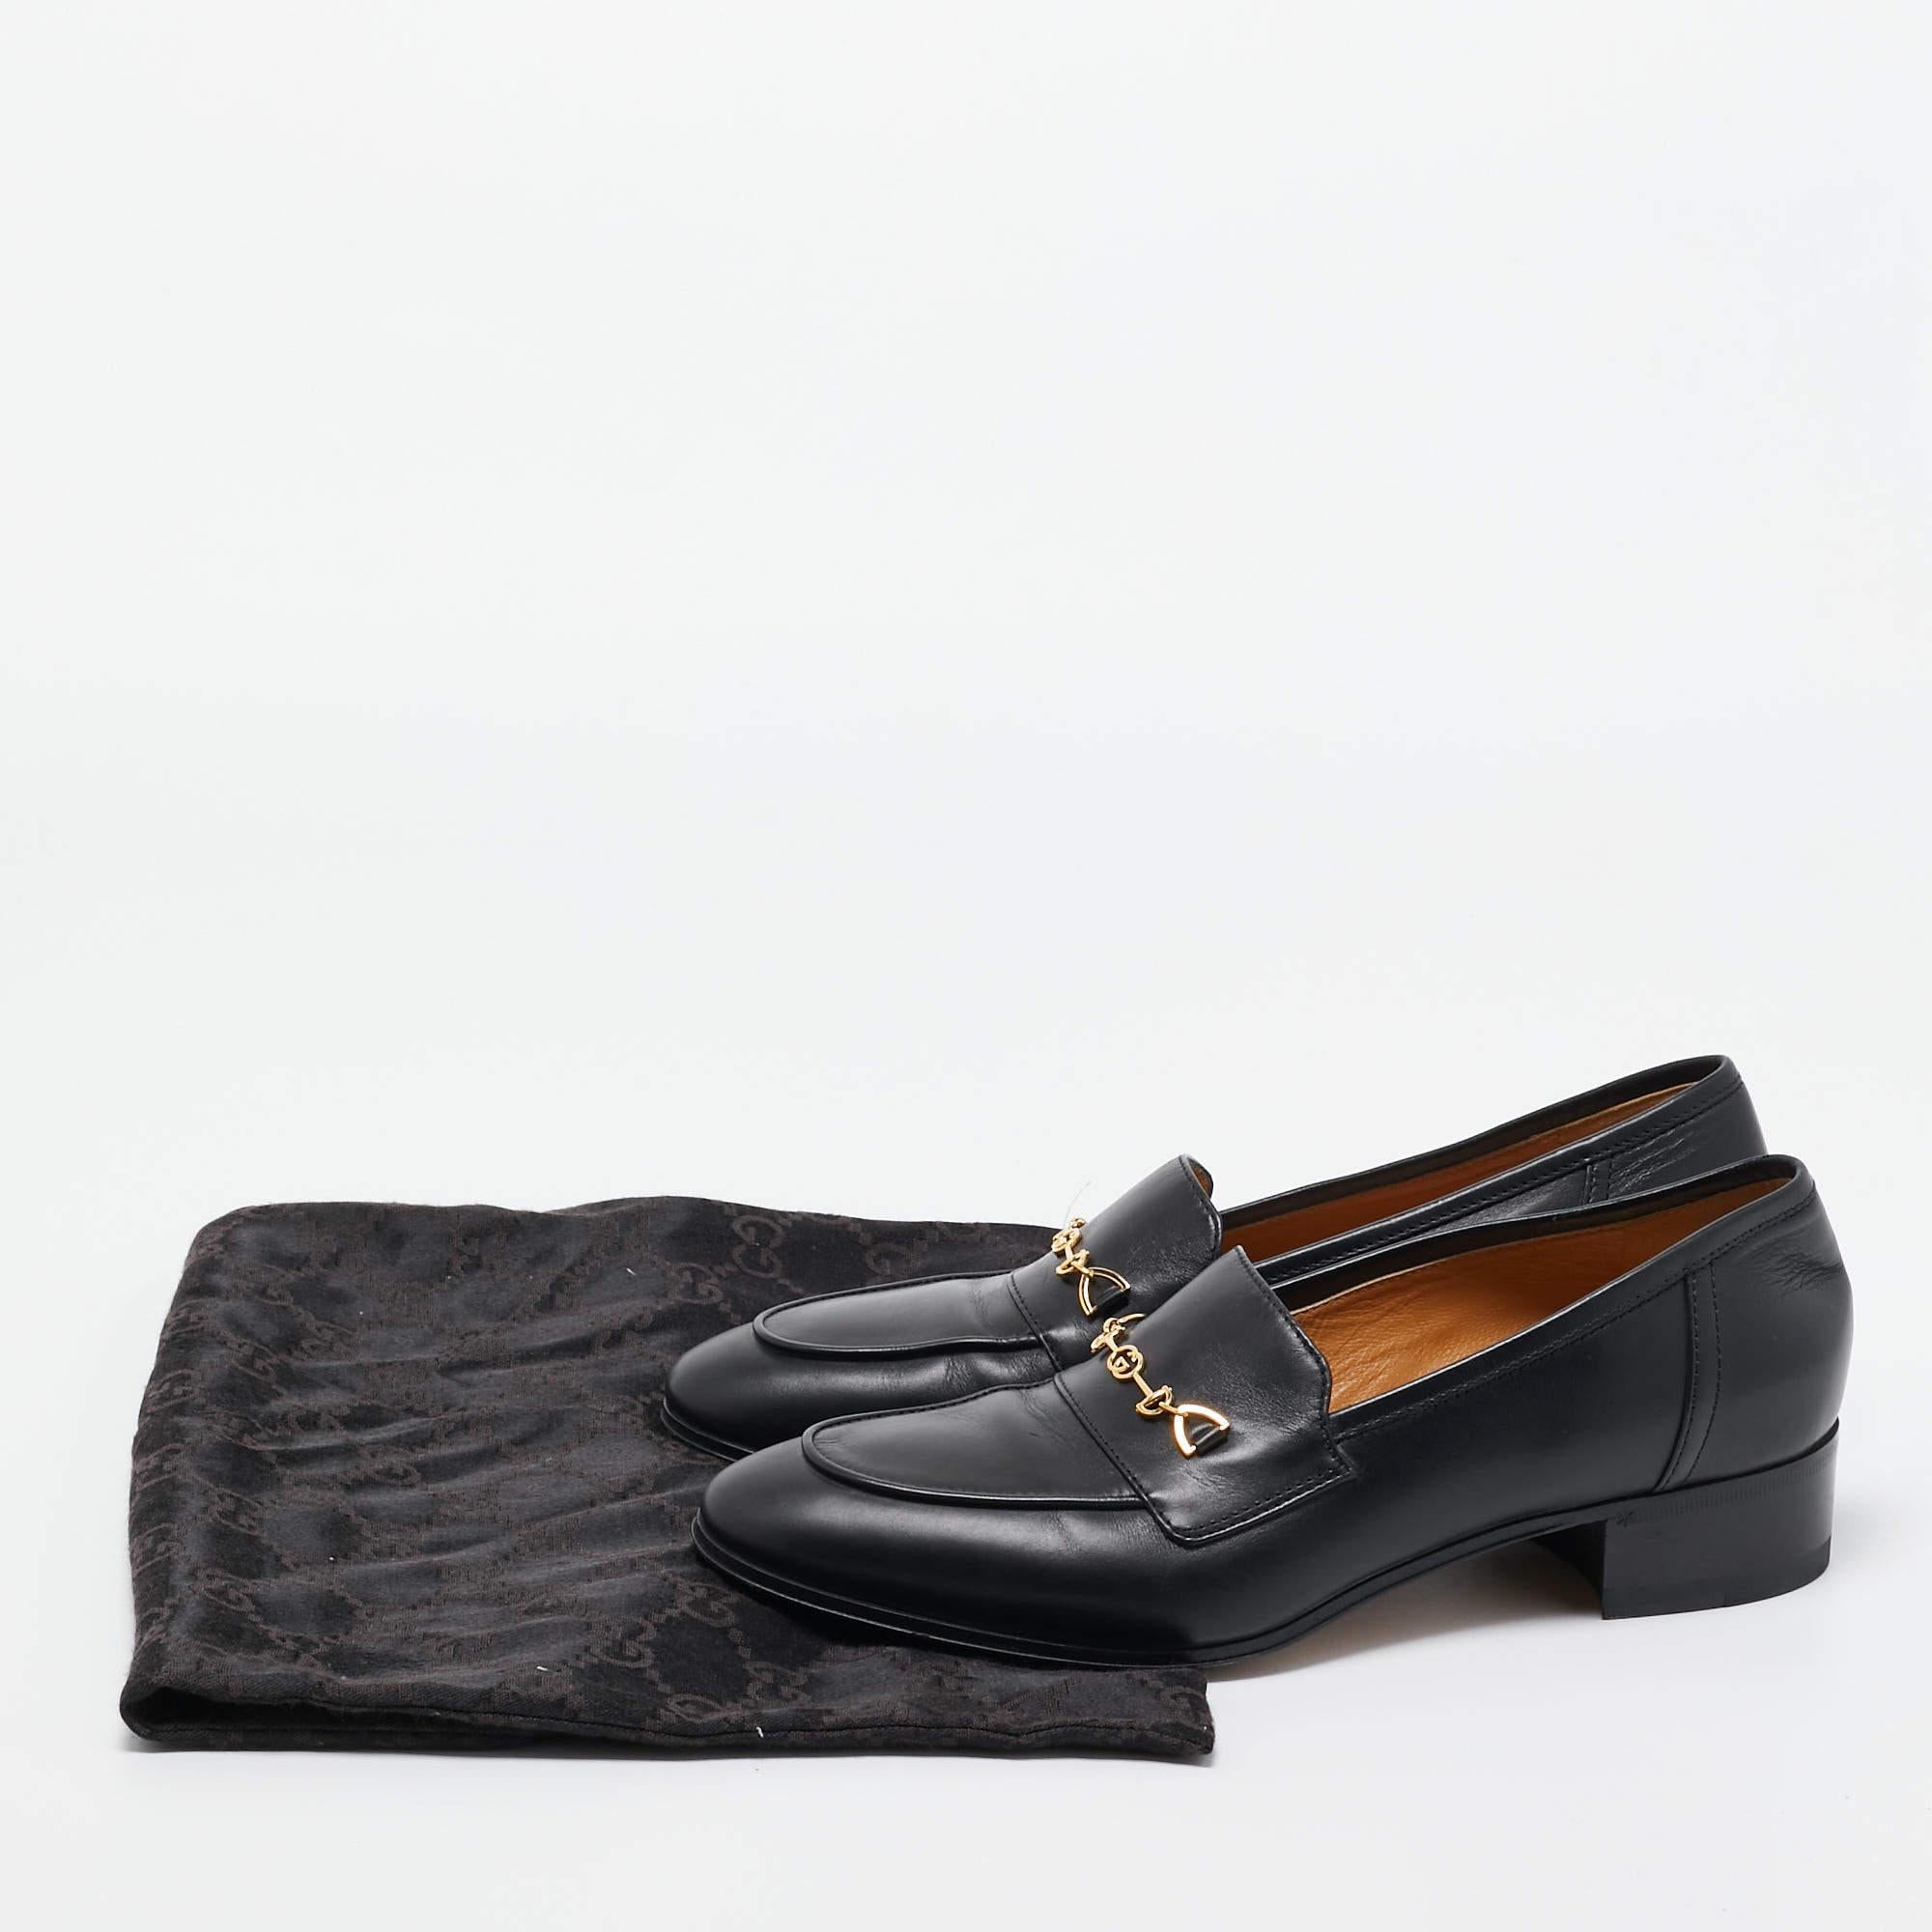 Gucci Black Leather Horsebit Loafers Size 39 5